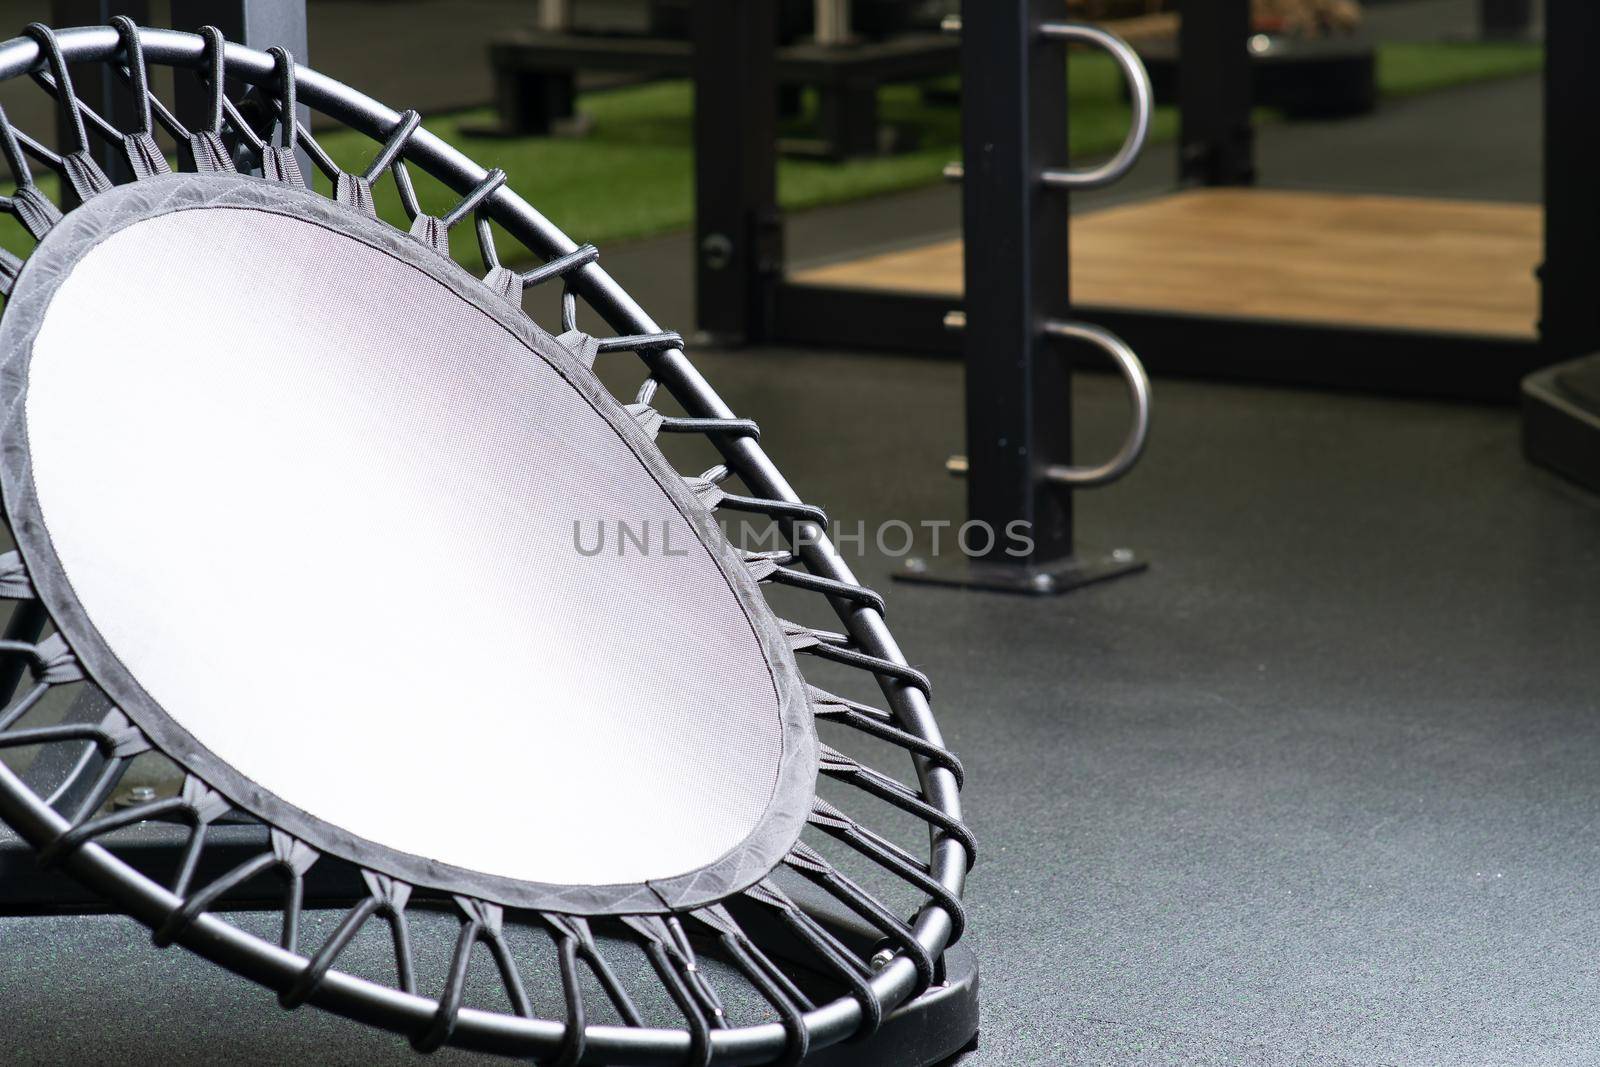 Sports home patio backyard trampoline concept wooden kettlebell exercise, from ball gym from bounce for steel medicine, morning indian. Leisure jumper playground, little by 89167702191